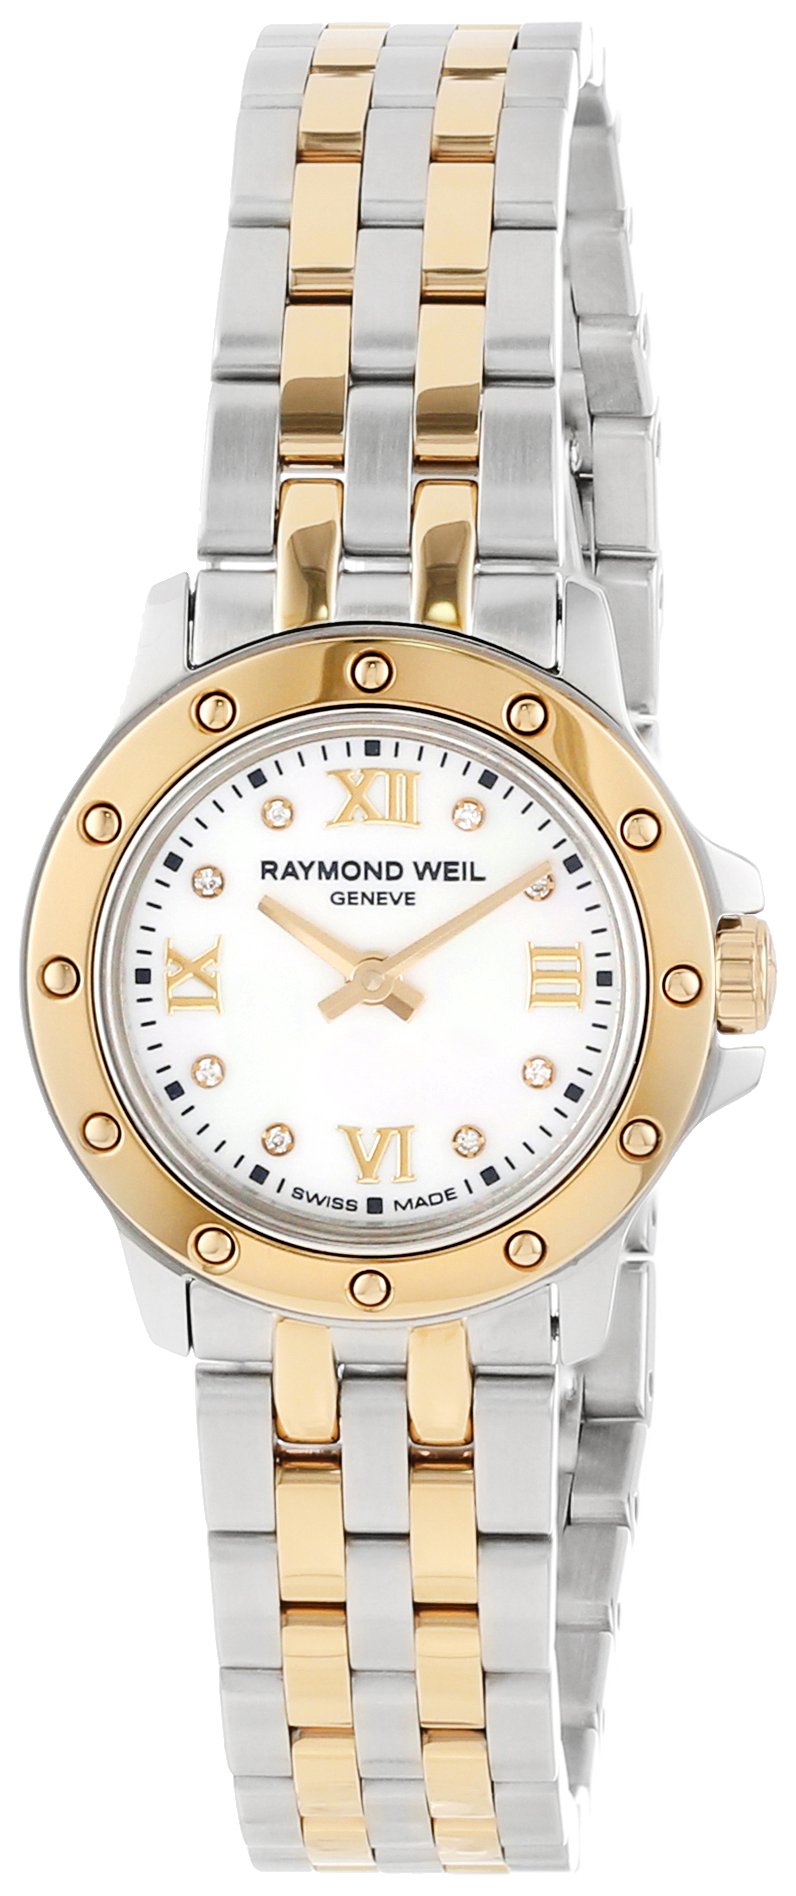 Raymond Weil Women's 5799-STP-00995 Diamond-Accented Two-Tone Stainless Steel Watch